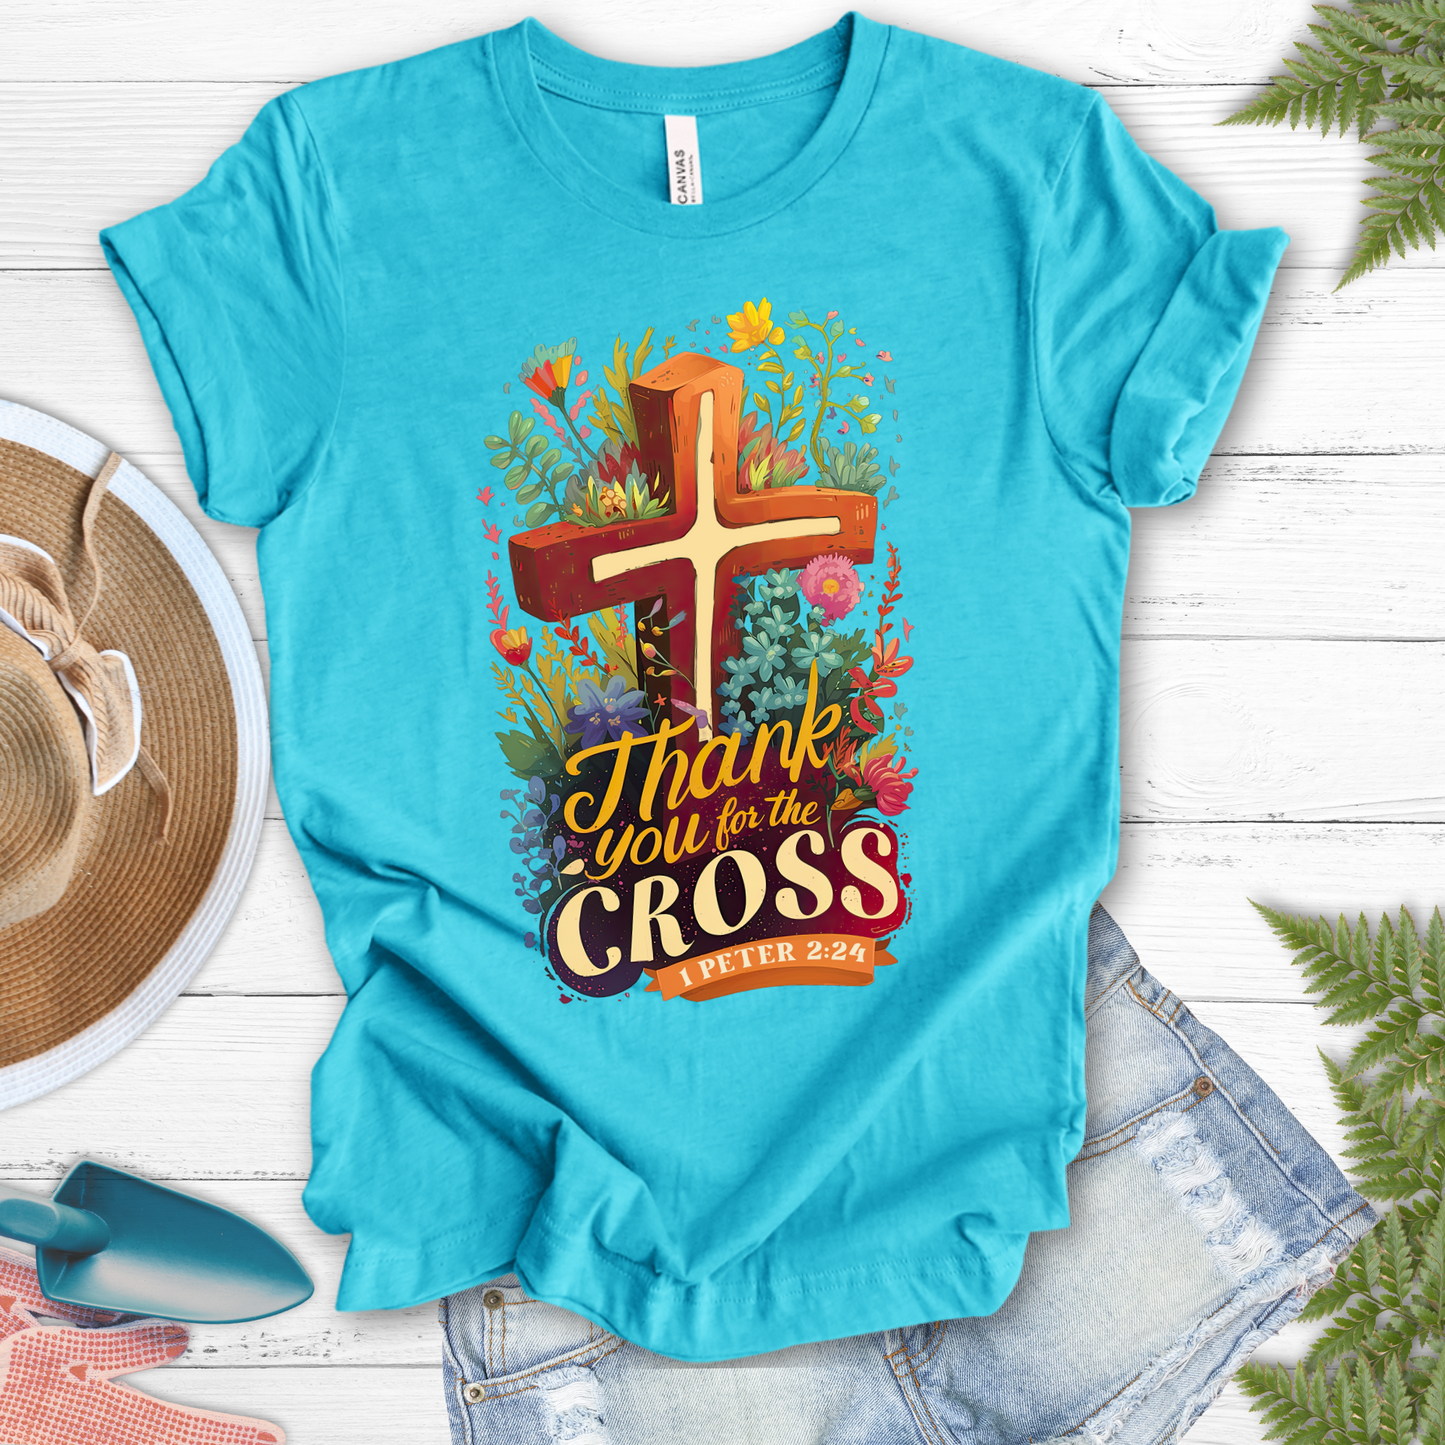 Thank you for the cross tee - Additional Colors